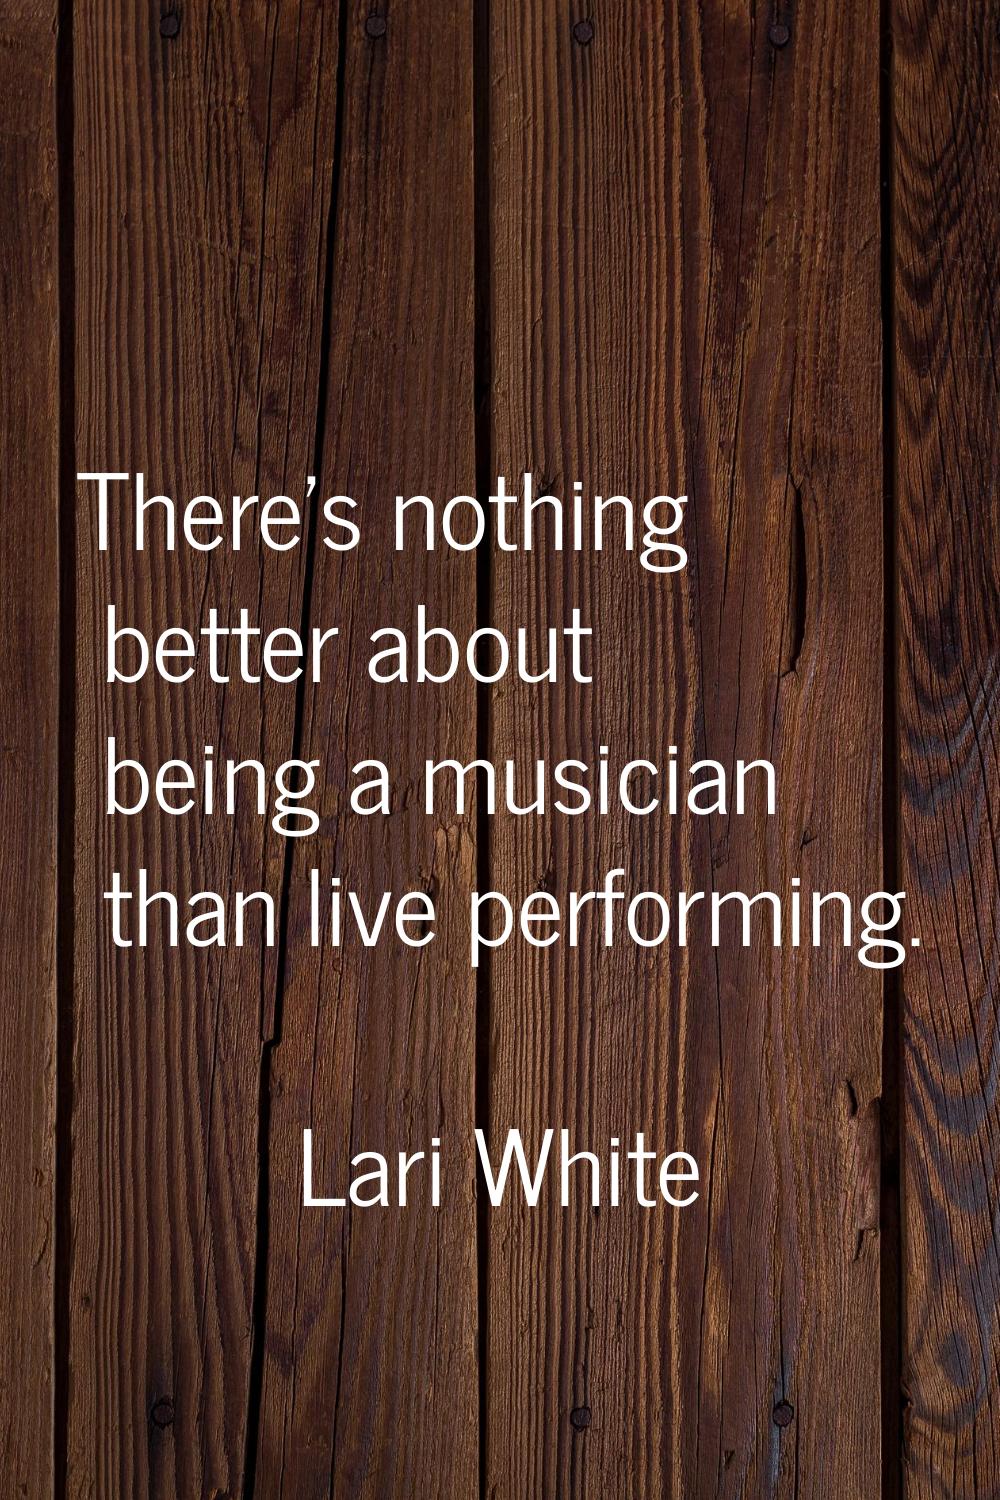 There's nothing better about being a musician than live performing.